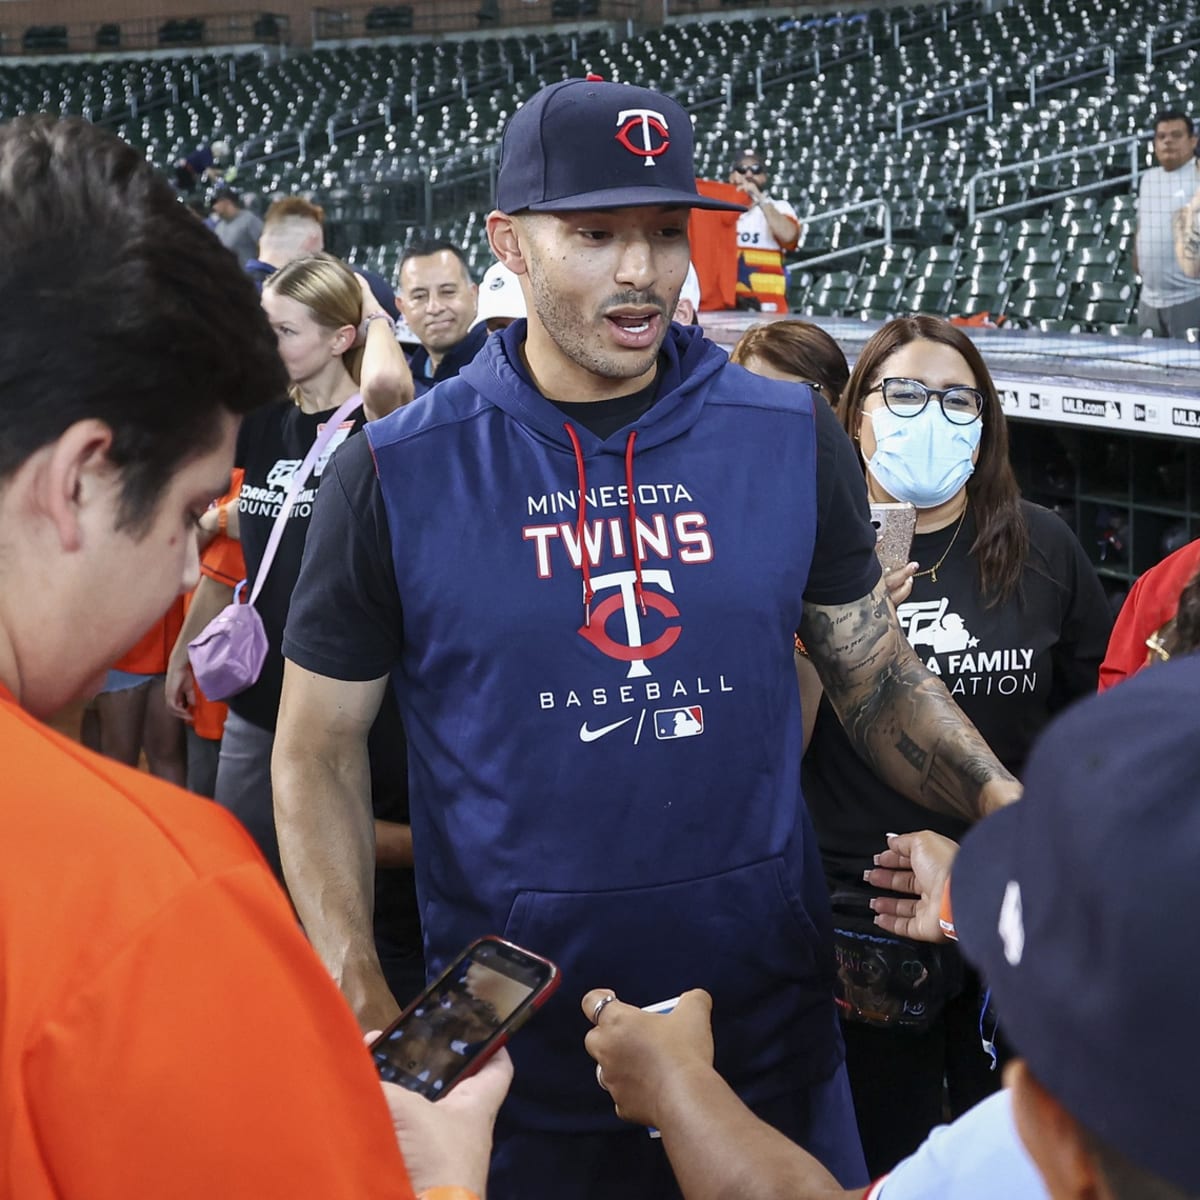 Houston Astros' Carlos Correa signs a shirt for a fan prior to